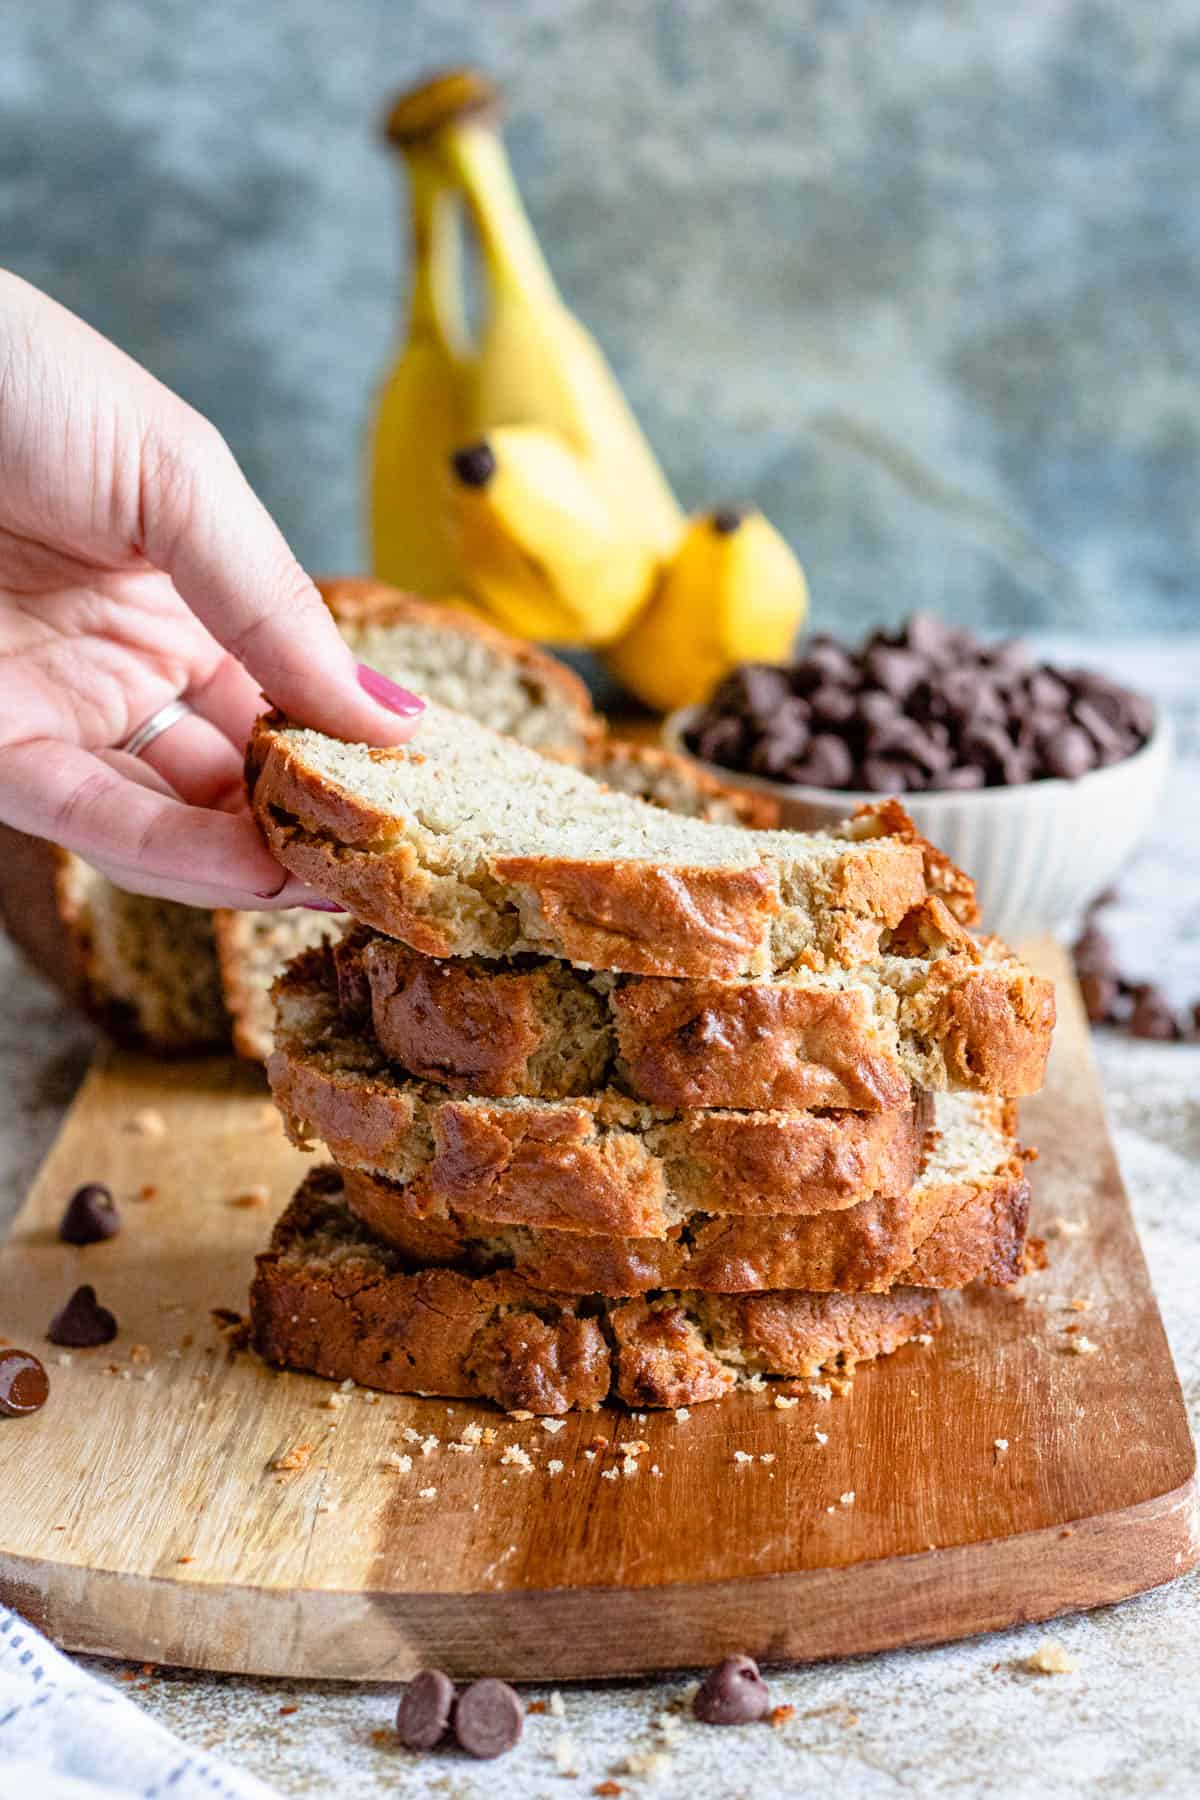 Pile of banana bread slices with a hand grabbing a piece